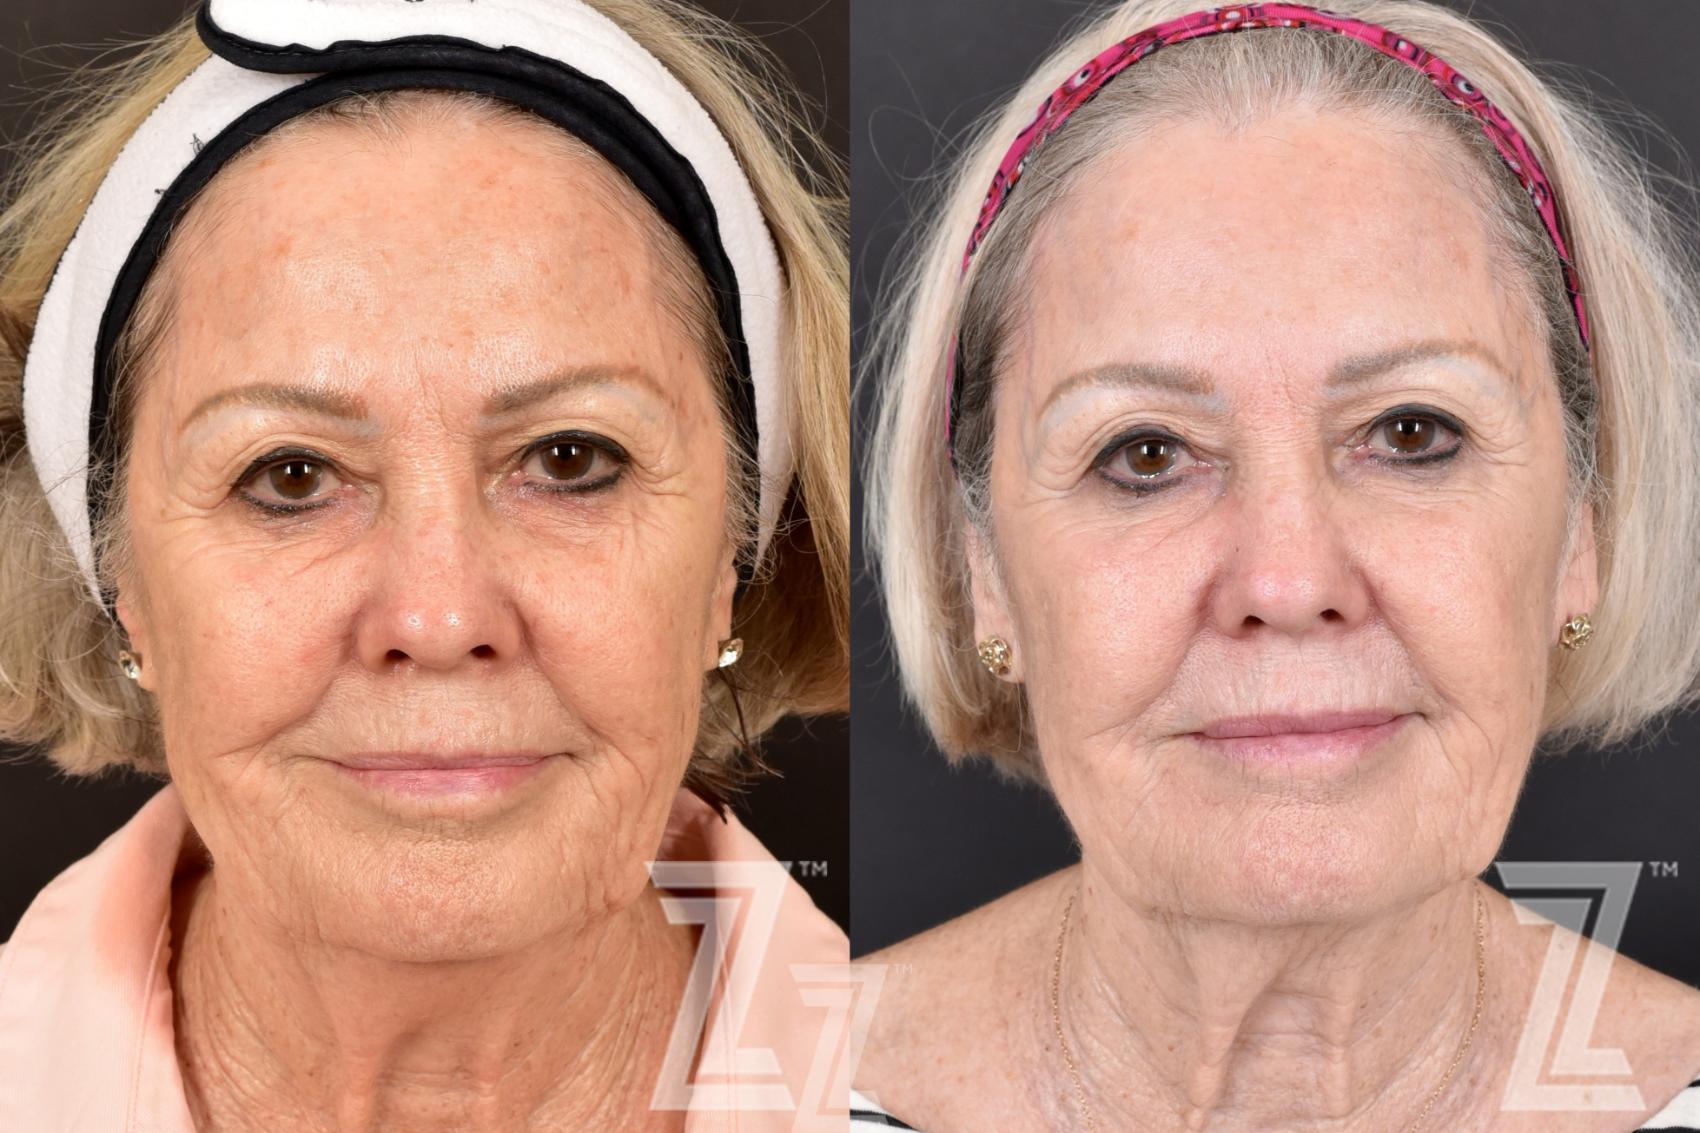 HALO Before & After Photo | Austin, TX | The Piazza Center for Plastic Surgery & Advanced Skin Care